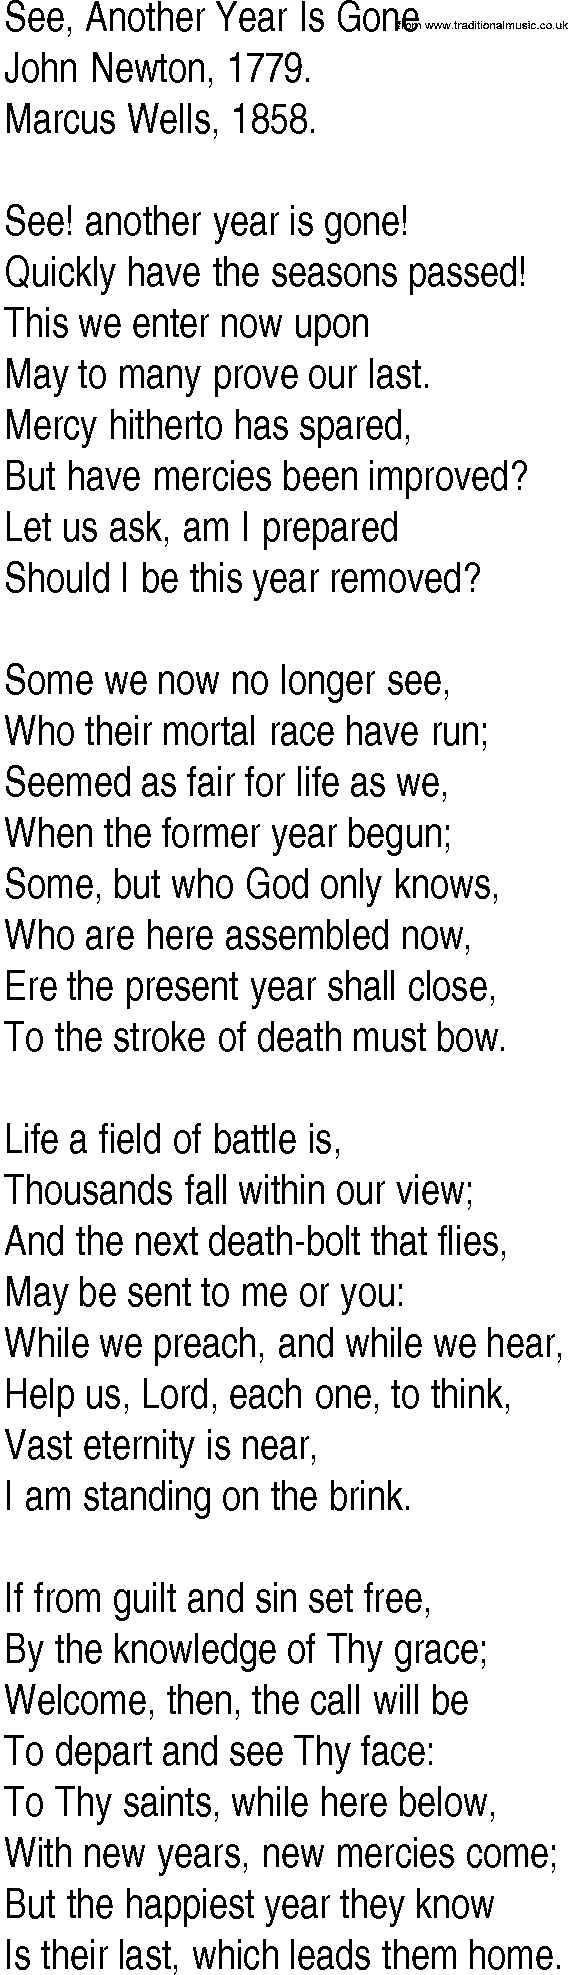 Hymn and Gospel Song: See, Another Year Is Gone by John Newton lyrics